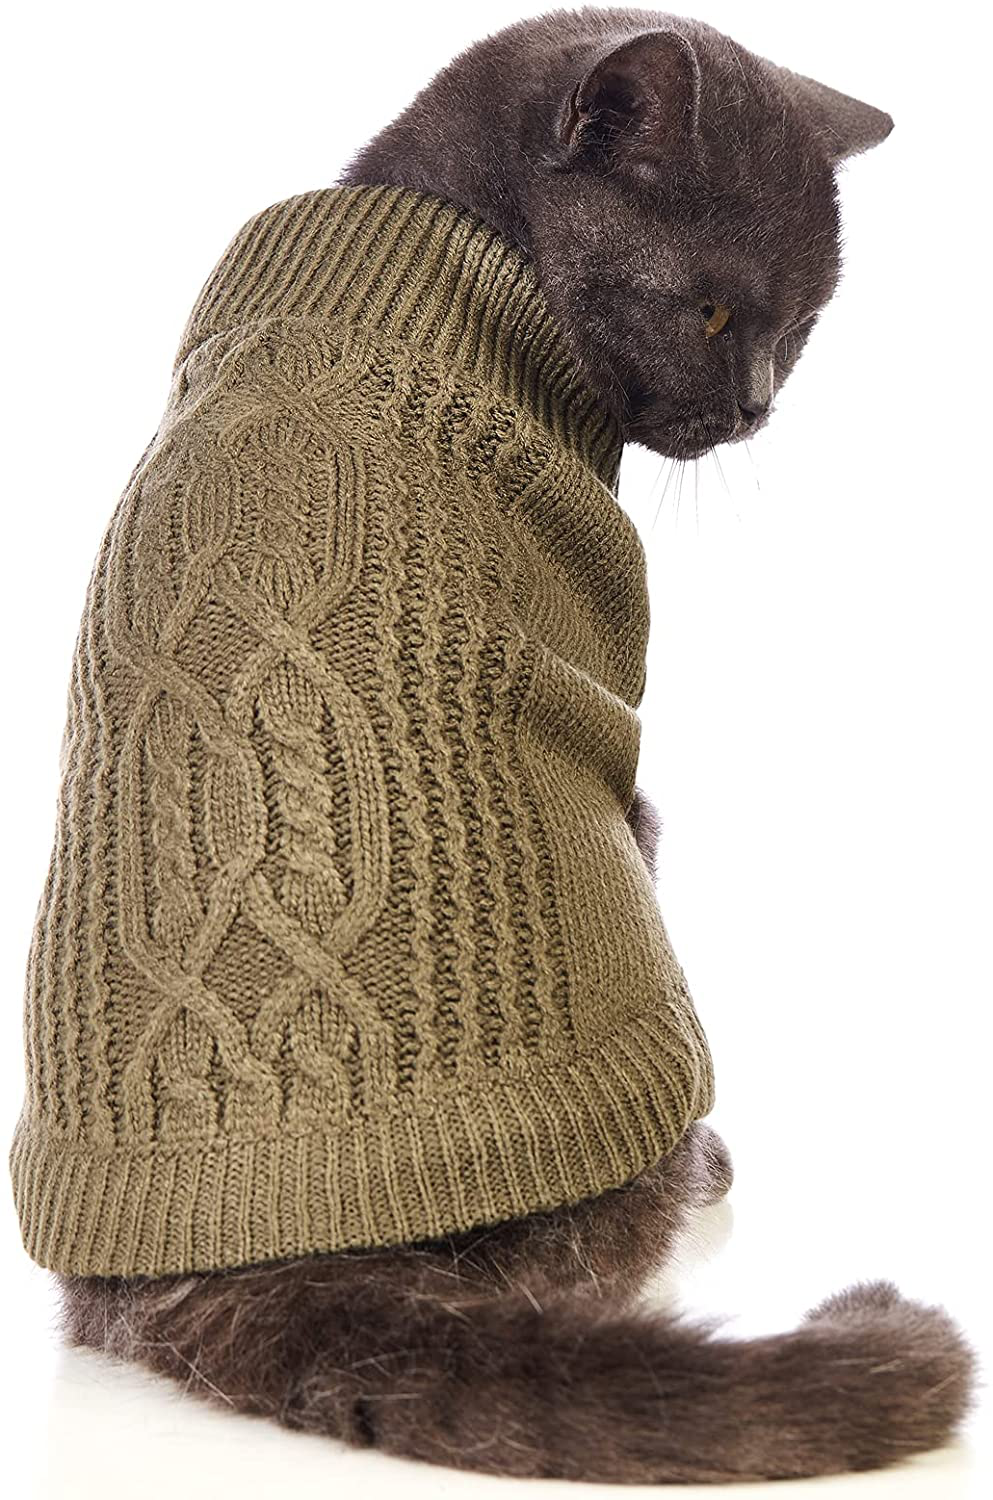 Jnancun Cat Sweater Turtleneck Knitted Sleeveless Cat Clothes Warm Winter Kitten Clothes Outfits for Cats or Small Dogs in Cold Season Animals & Pet Supplies > Pet Supplies > Cat Supplies > Cat Apparel Jnancun Olive Green X-Small 